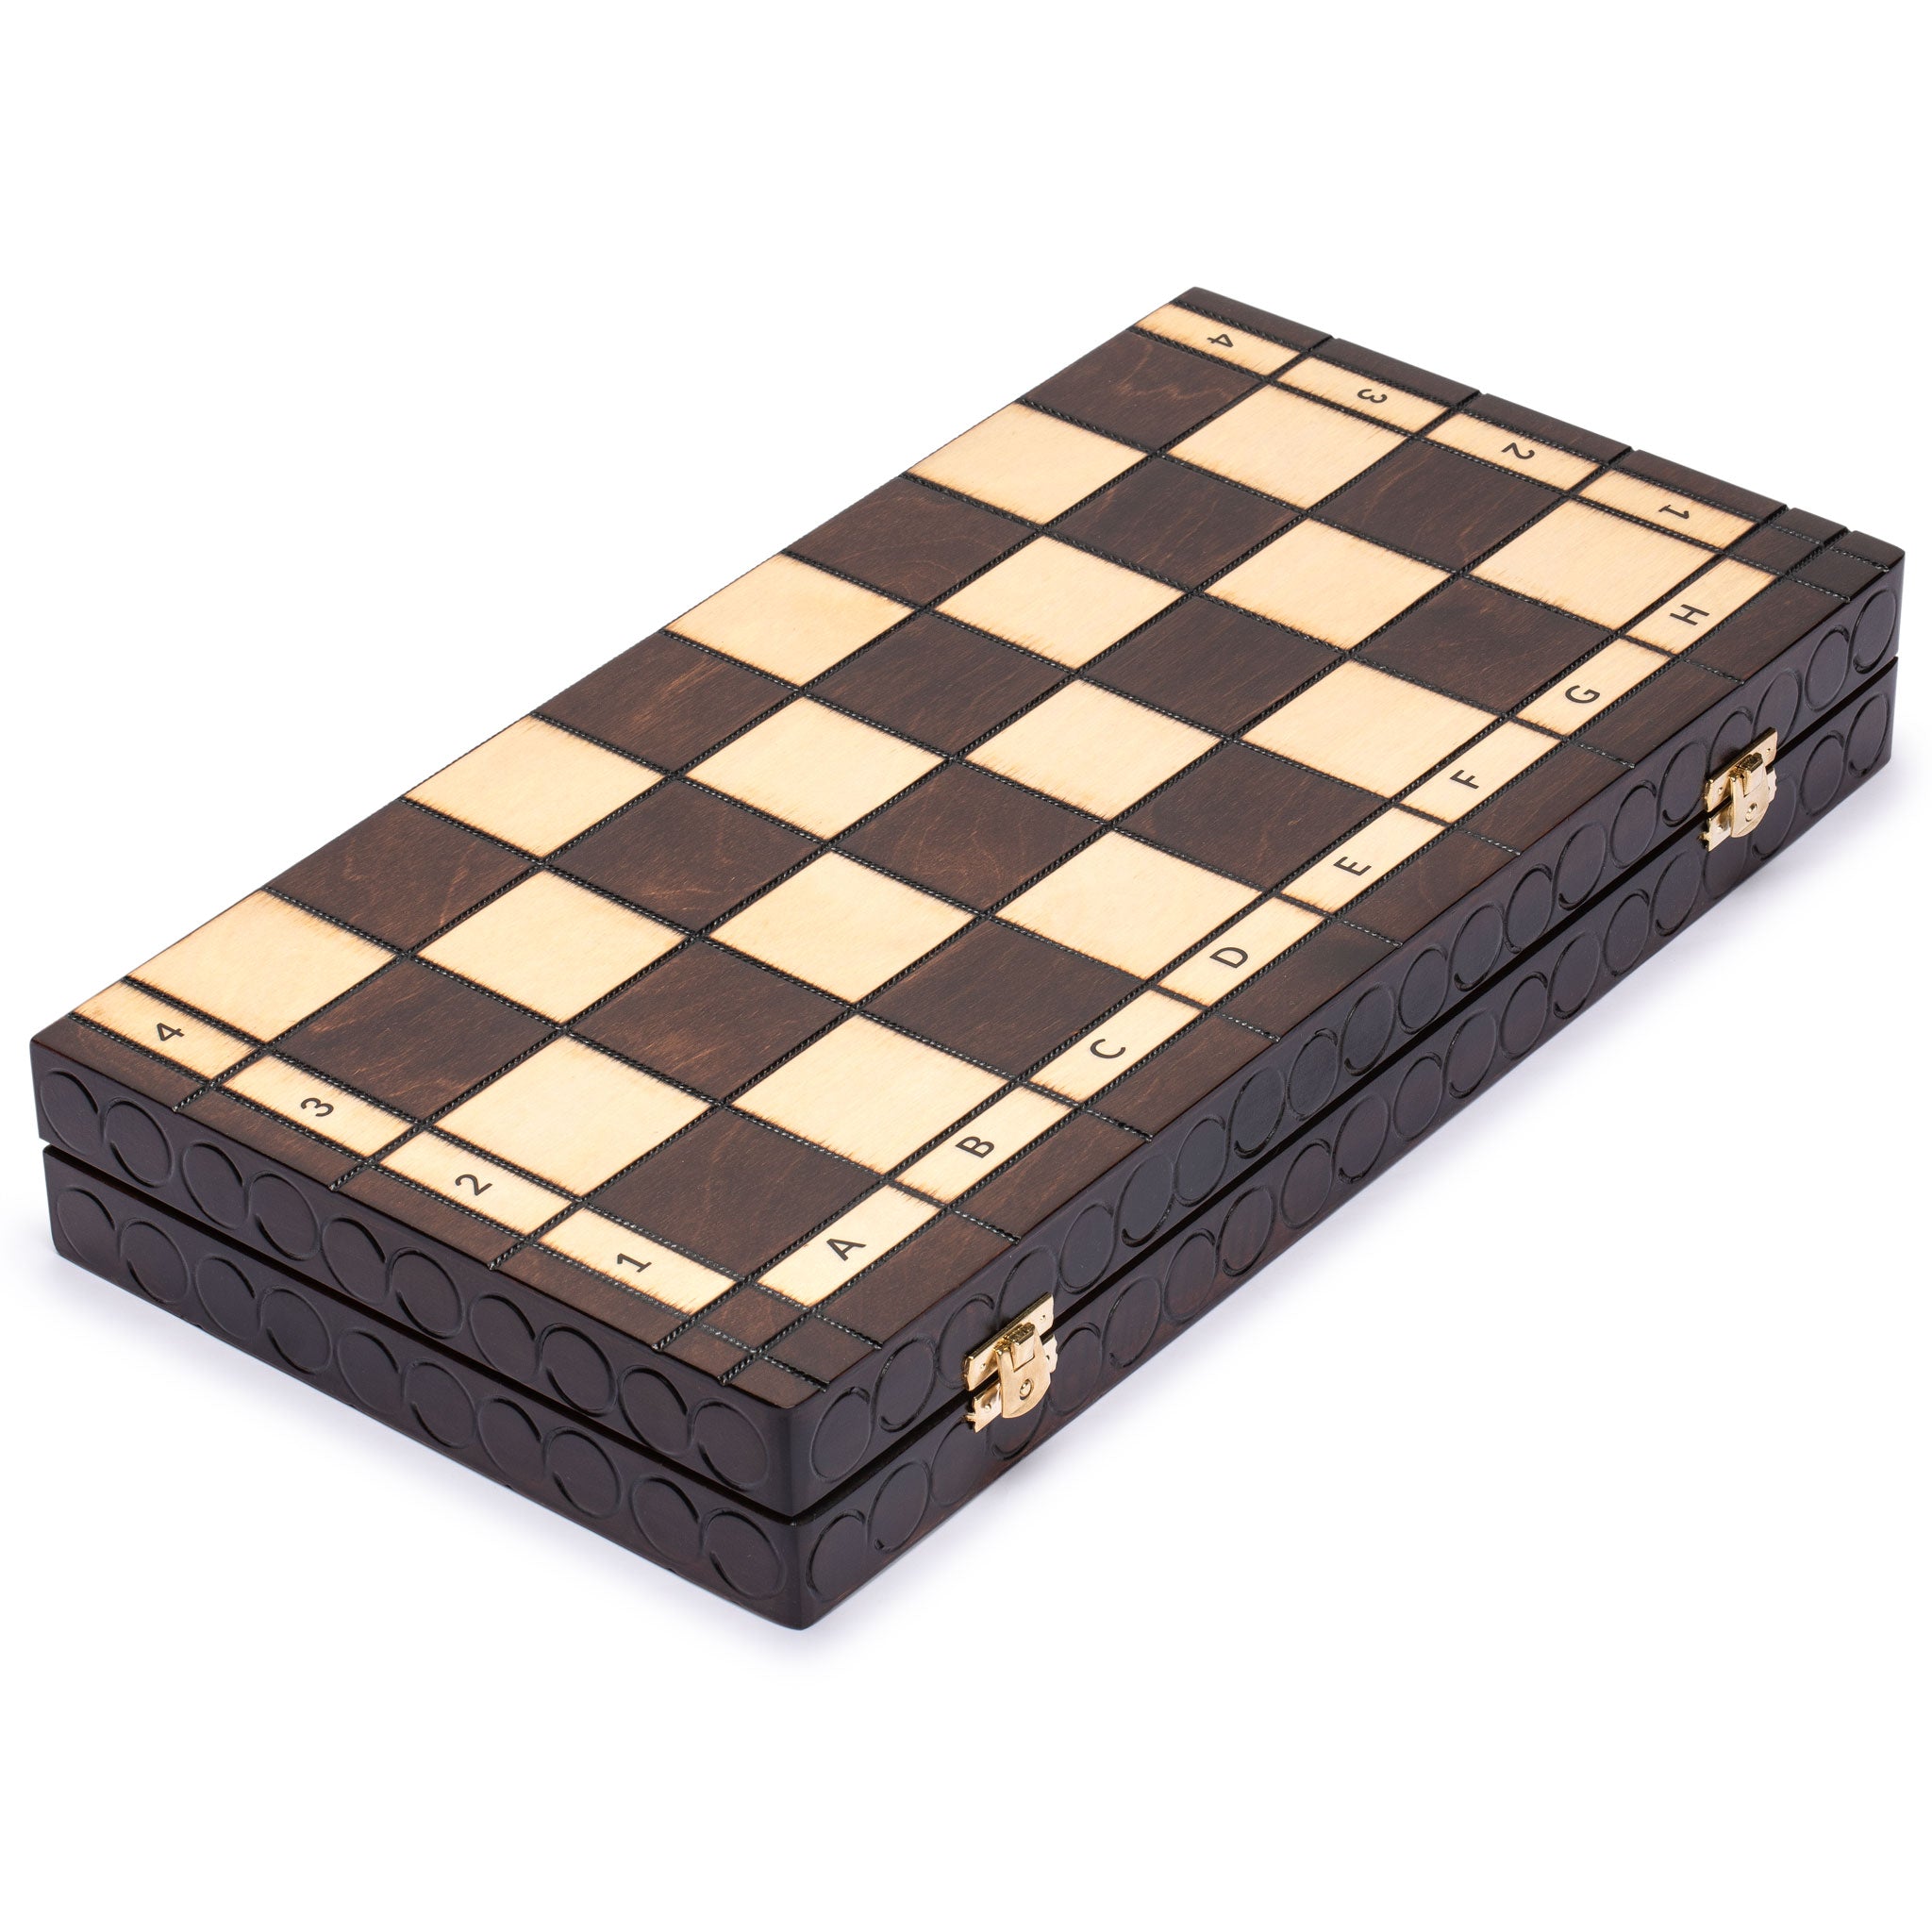 Husaria European International Chess Wooden Game Set, "King's Classic" - 18" Large Size Chess Set